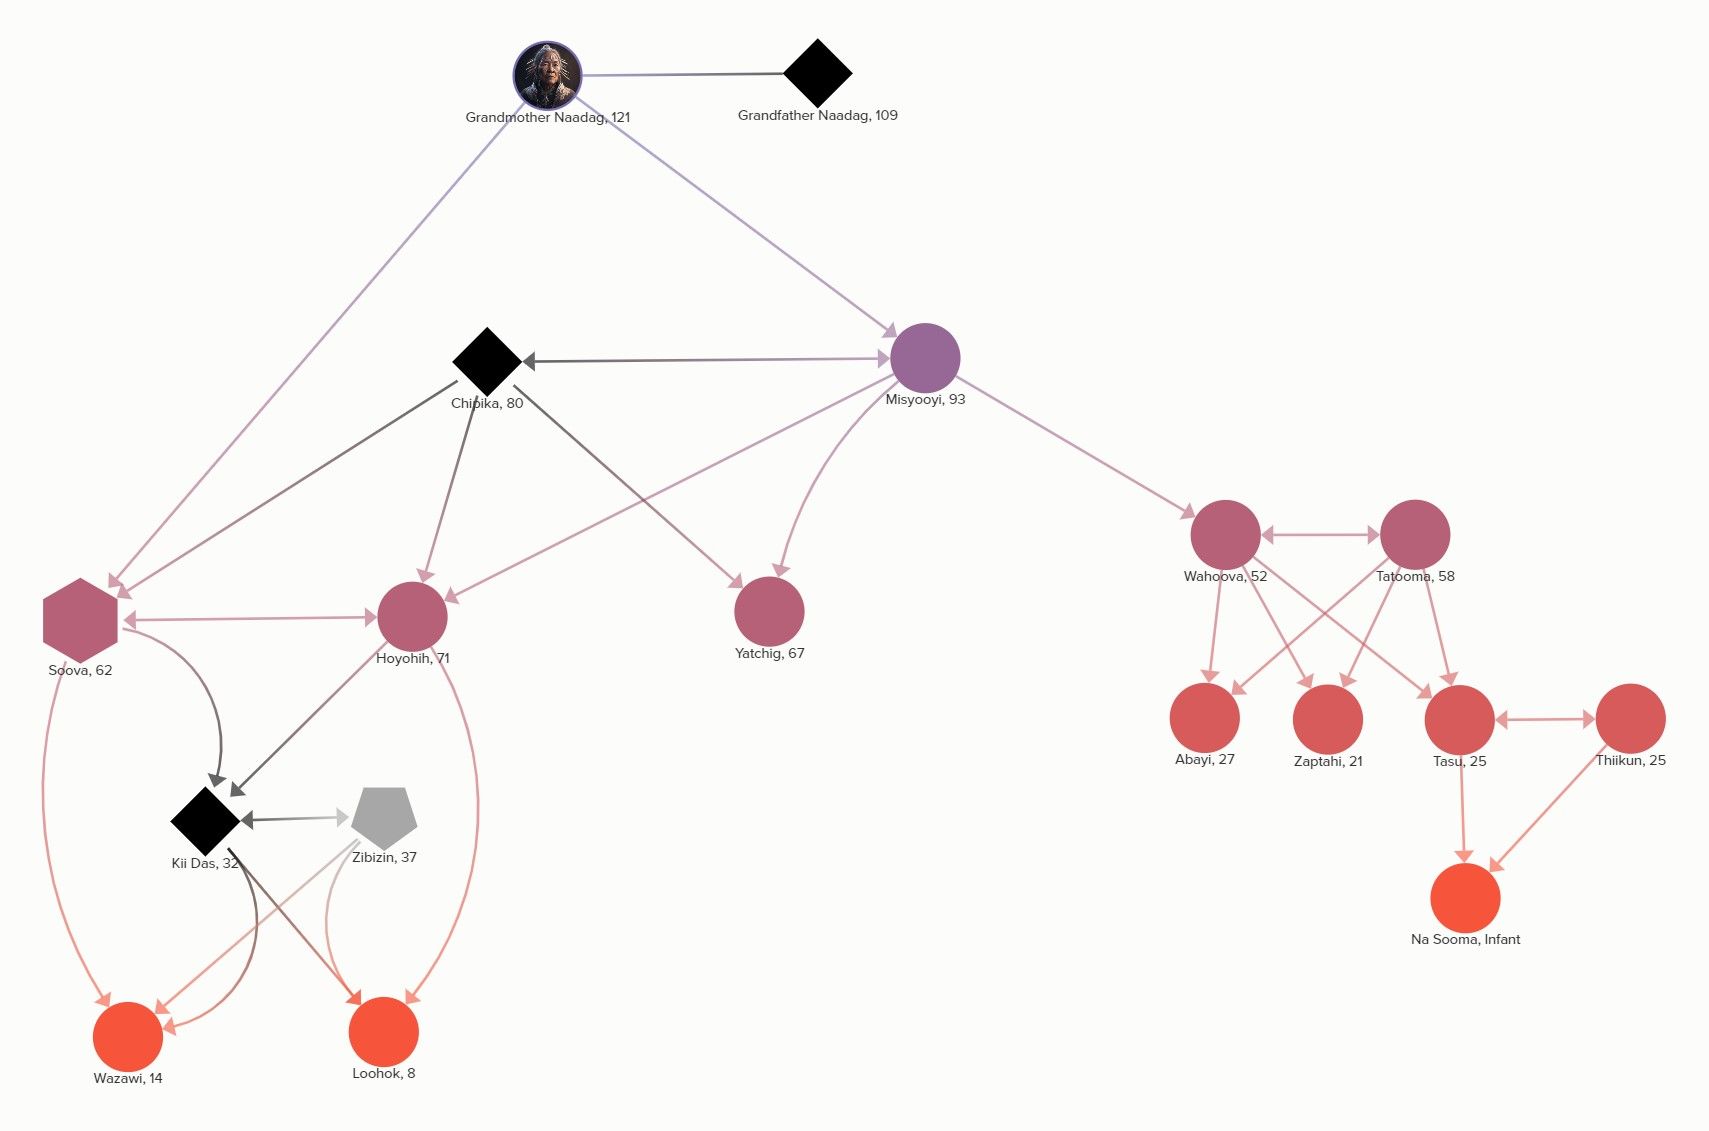 TTRPG Relationship Mapping with kumu.io